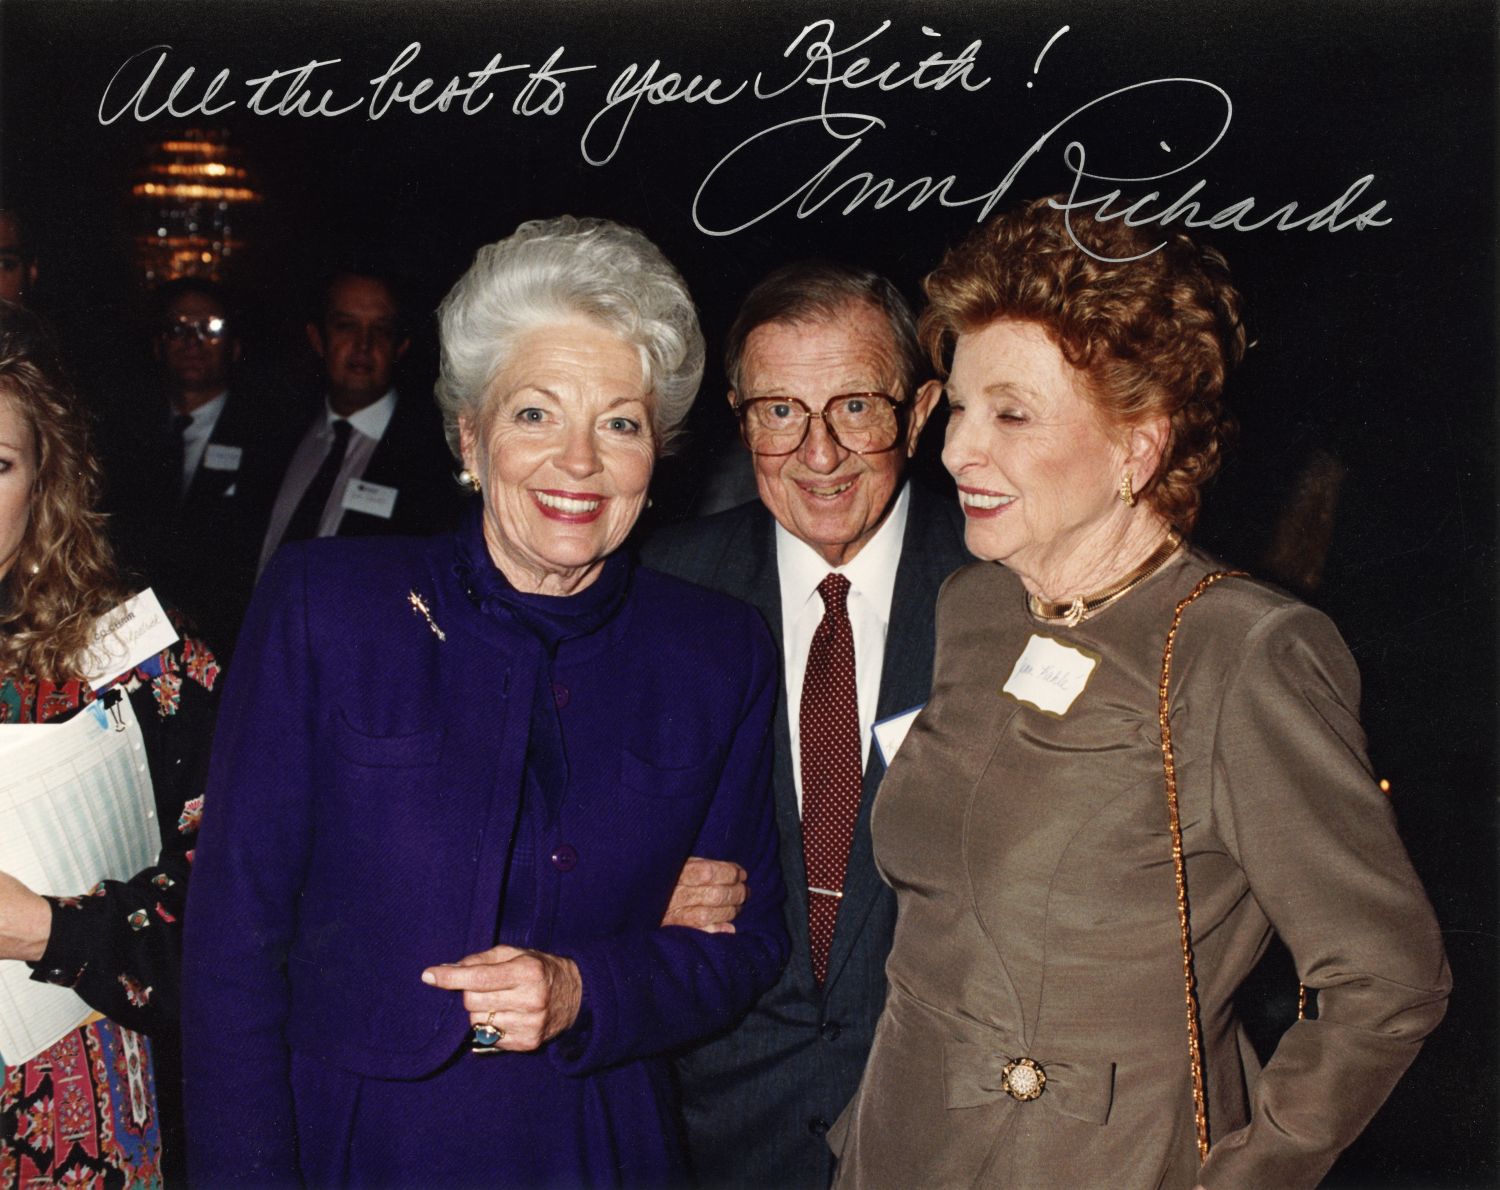 Keith and Jean Kahle pictured with Ann Richards, left. Richards signed the top of the photograph with her name and "All the best to you Keith!"